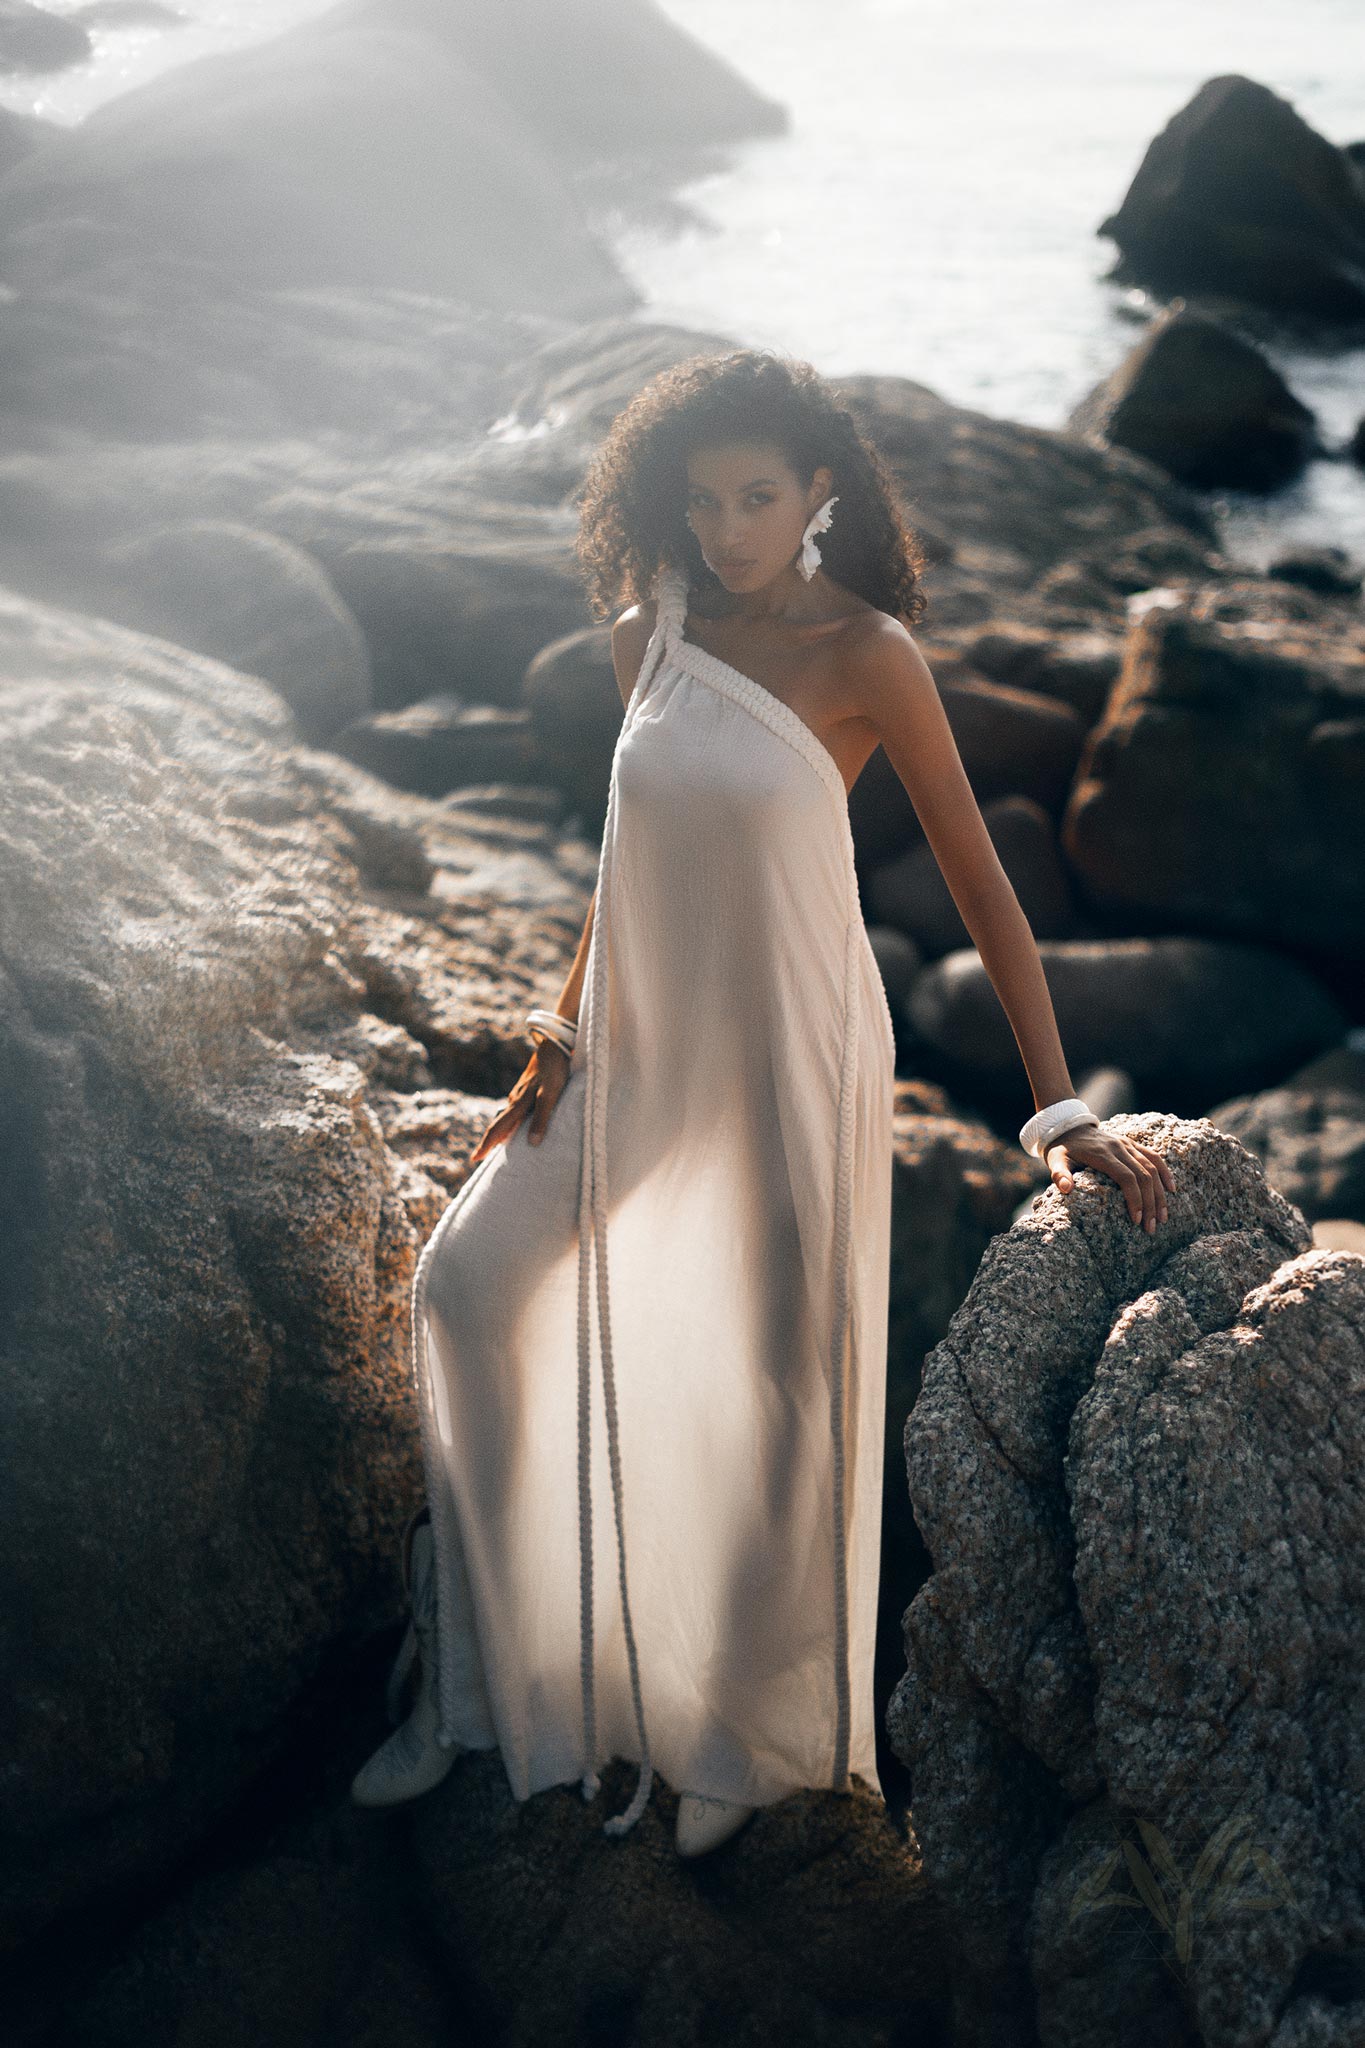 One / Off Shoulder Maxi Dress: Transition seamlessly from day to night in our versatile one/off shoulder maxi. Made from premium cotton, its flattering fit and timeless design ensure you'll always make a statement.